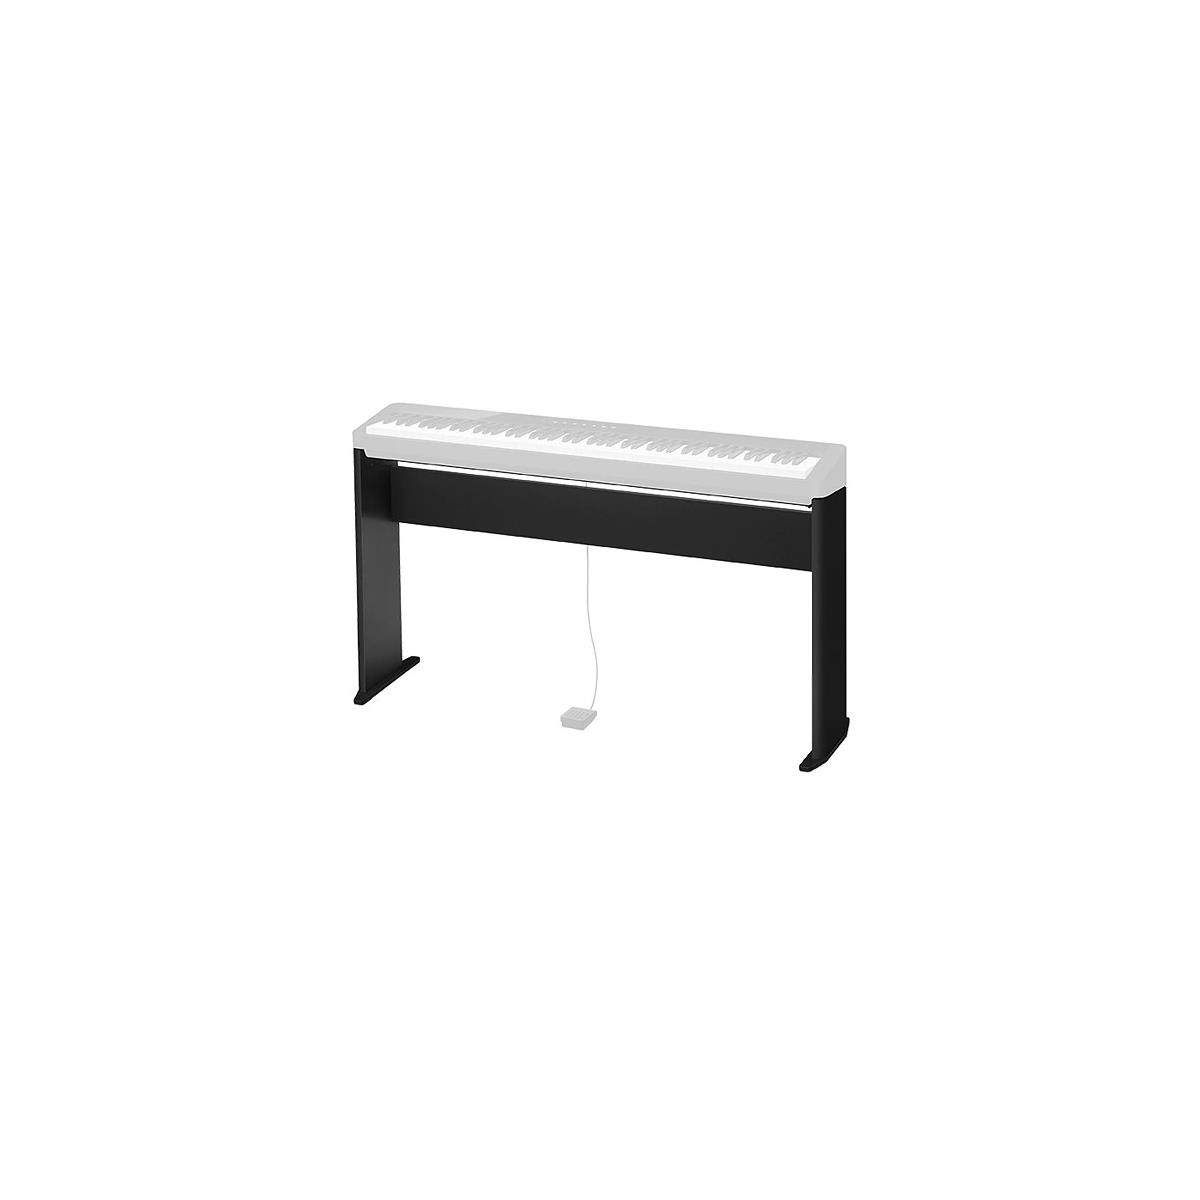 Image of Casio CS-68 Furniture-Style Privia Keyboard Stand